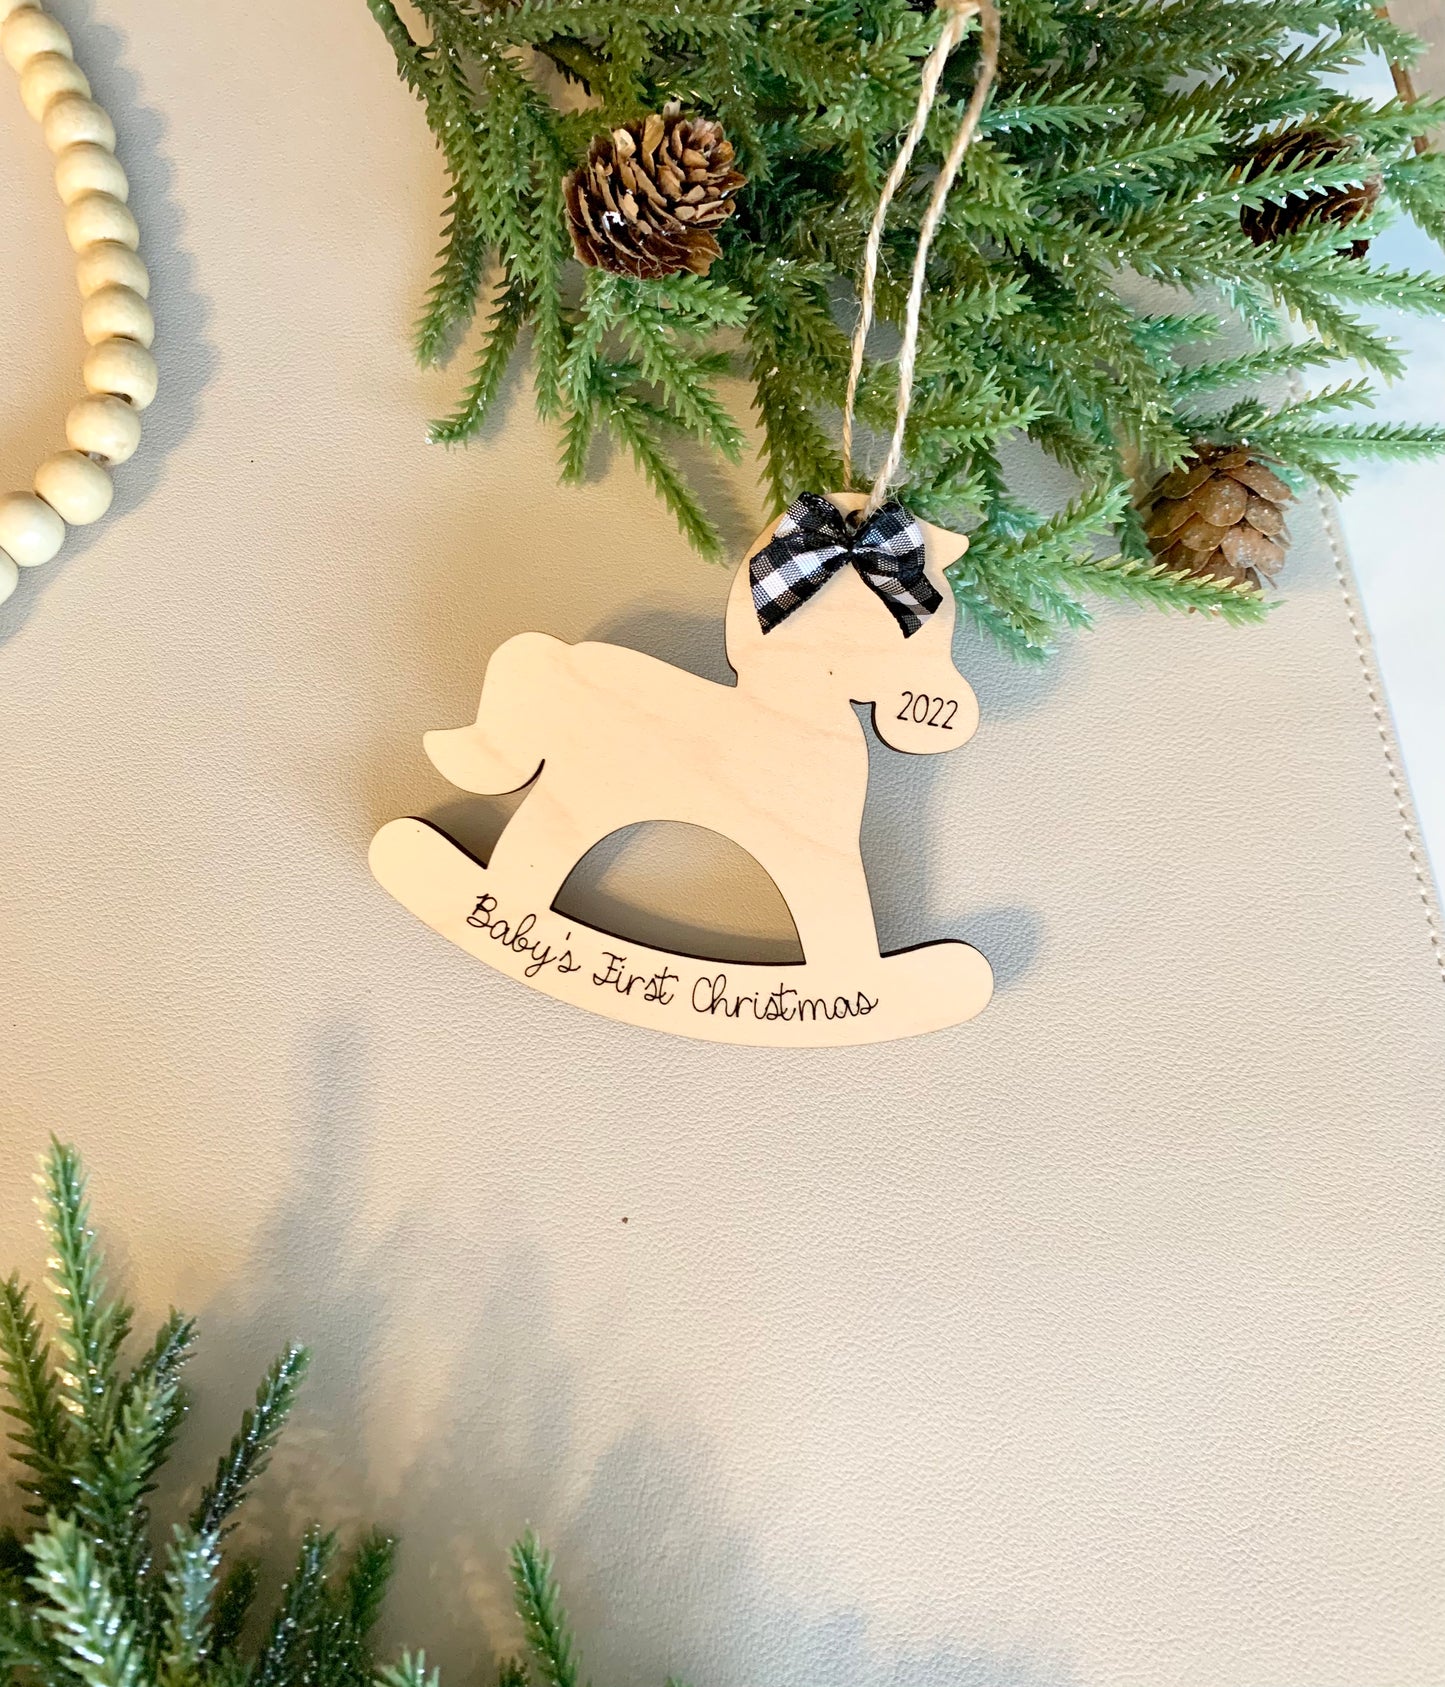 Rocking Horse Baby’s First Christmas Ornaments